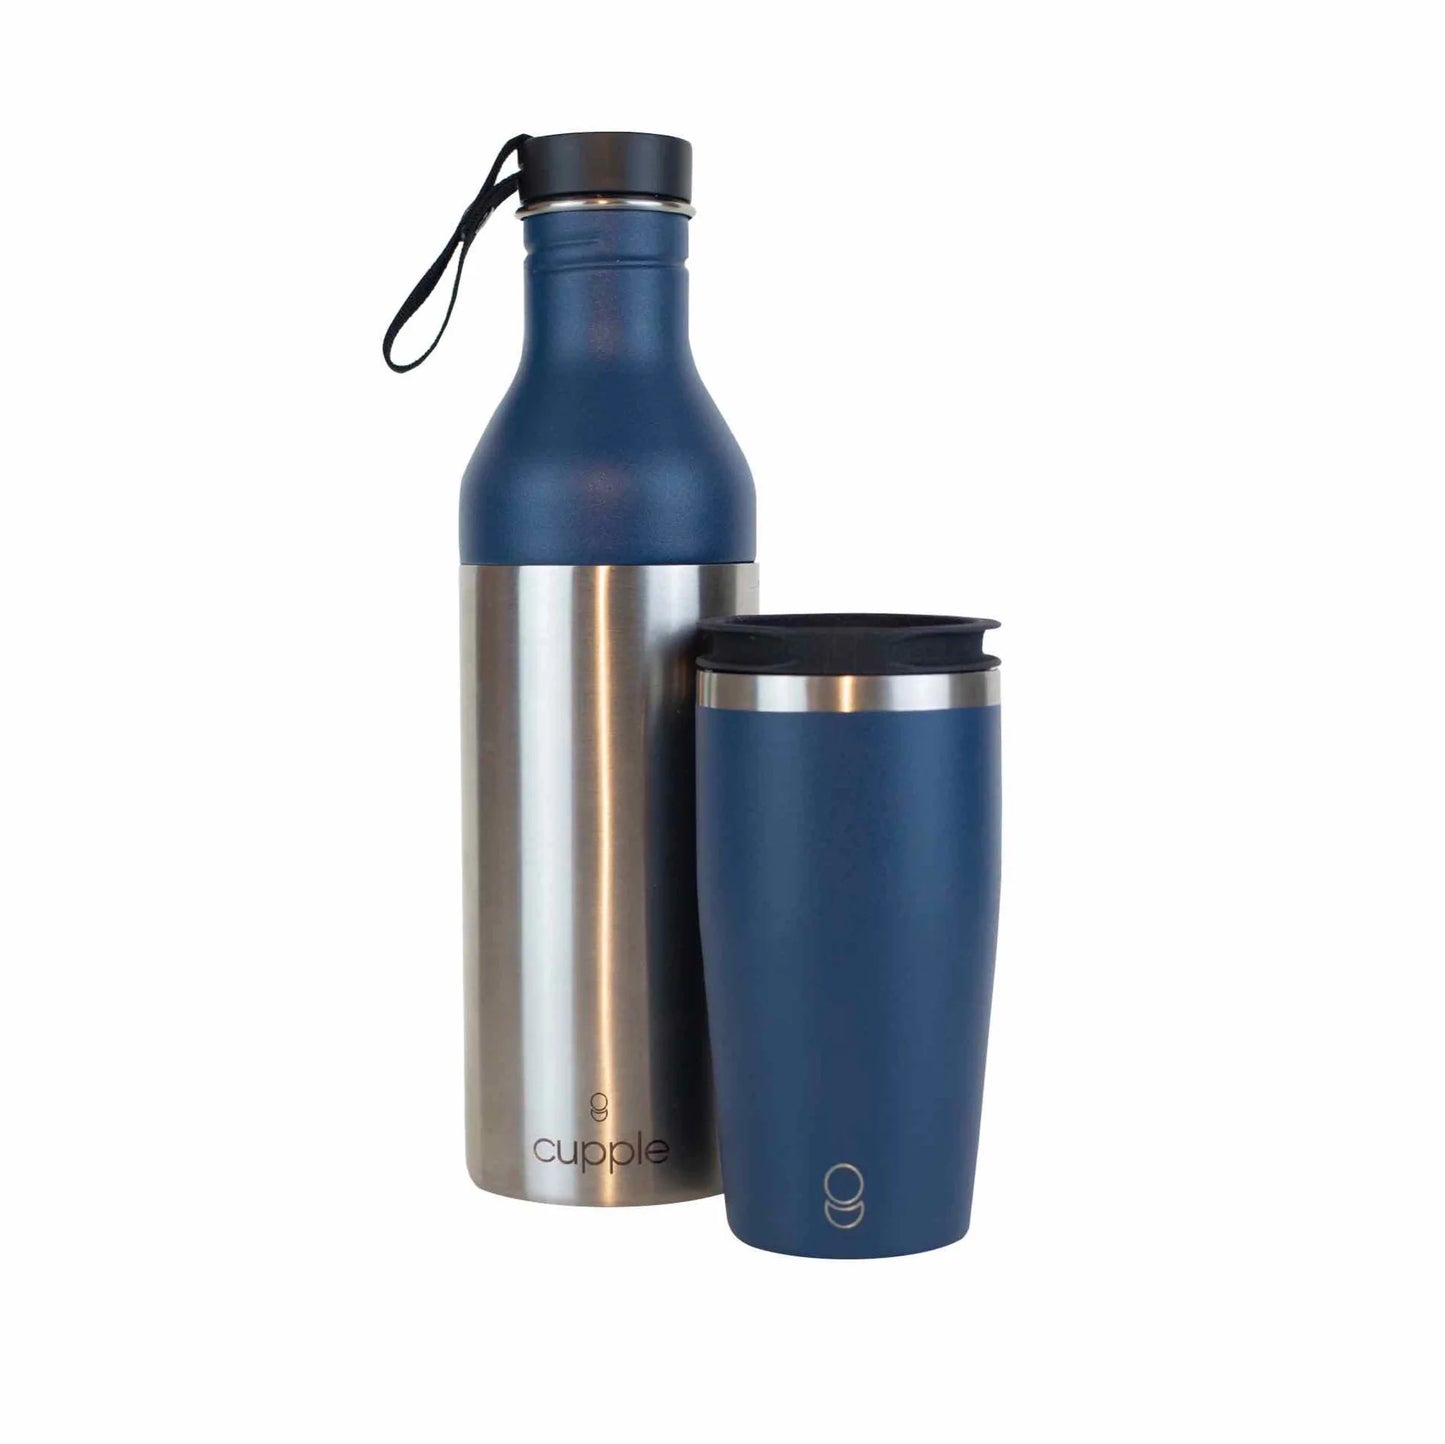 Cupple Midnight Blue Reuseable Bottle / Cup